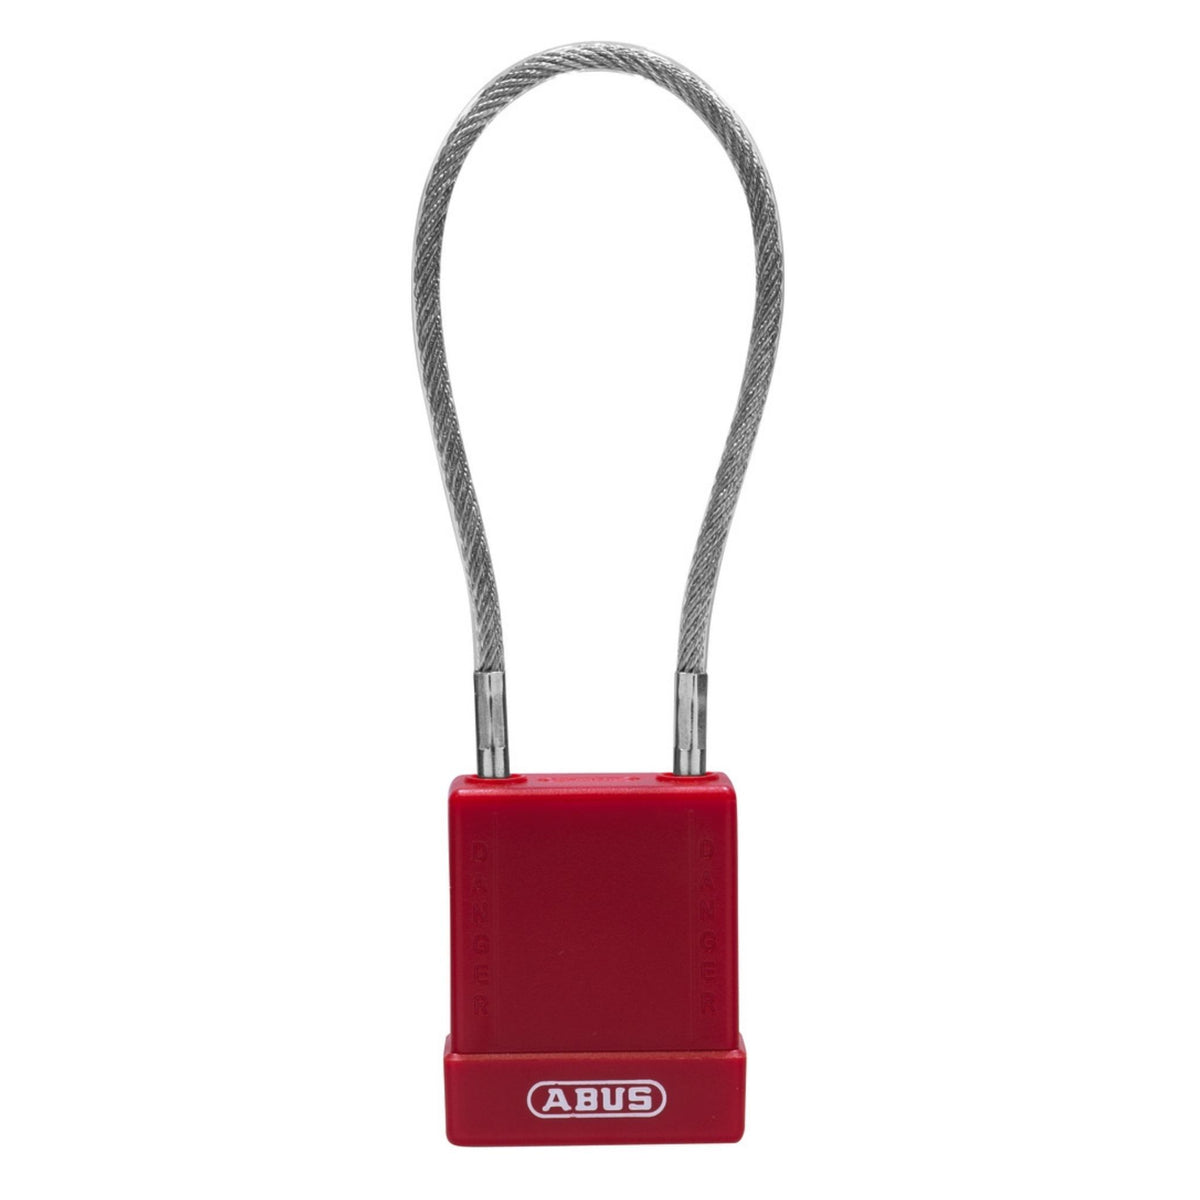 Abus 76/40CAB40 KA Red Safety Padlock with 8-Inch Cable - The Lock Source